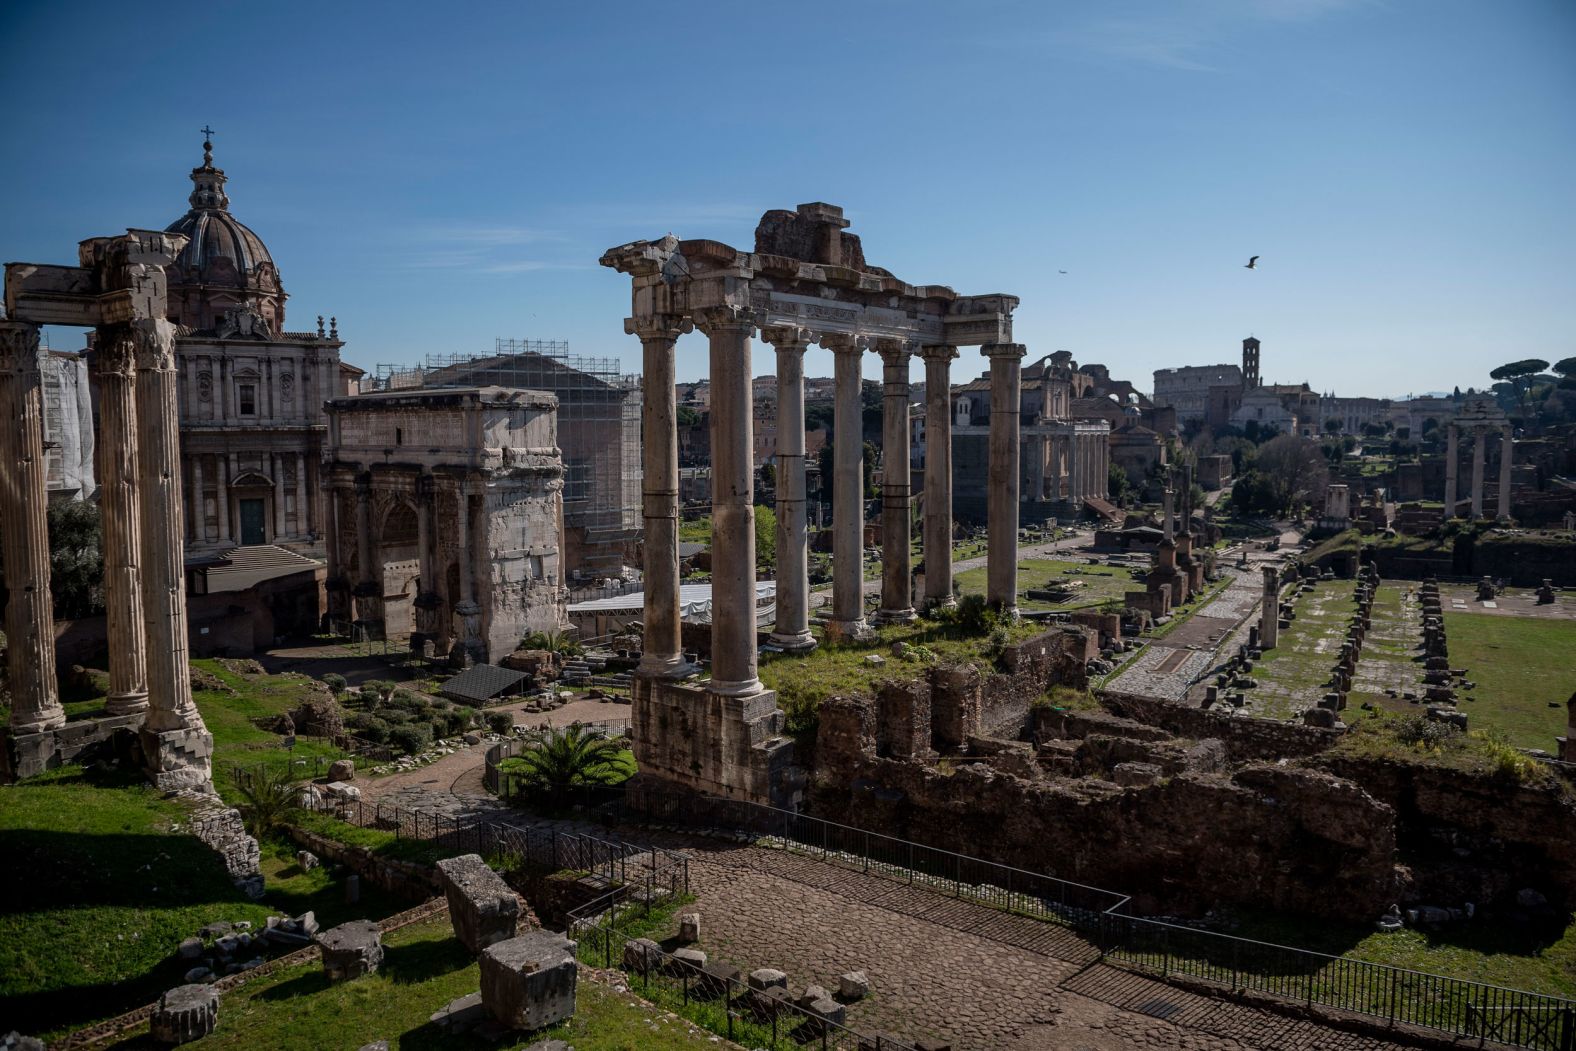 Ancient Roman ruins, normally filled with tourists, are empty on March 10. All of Italy <a href="https://www.cnn.com/2020/03/09/europe/coronavirus-italy-lockdown-intl/index.html" target="_blank">was put on lockdown</a> as coronavirus cases continued to spread in the country.